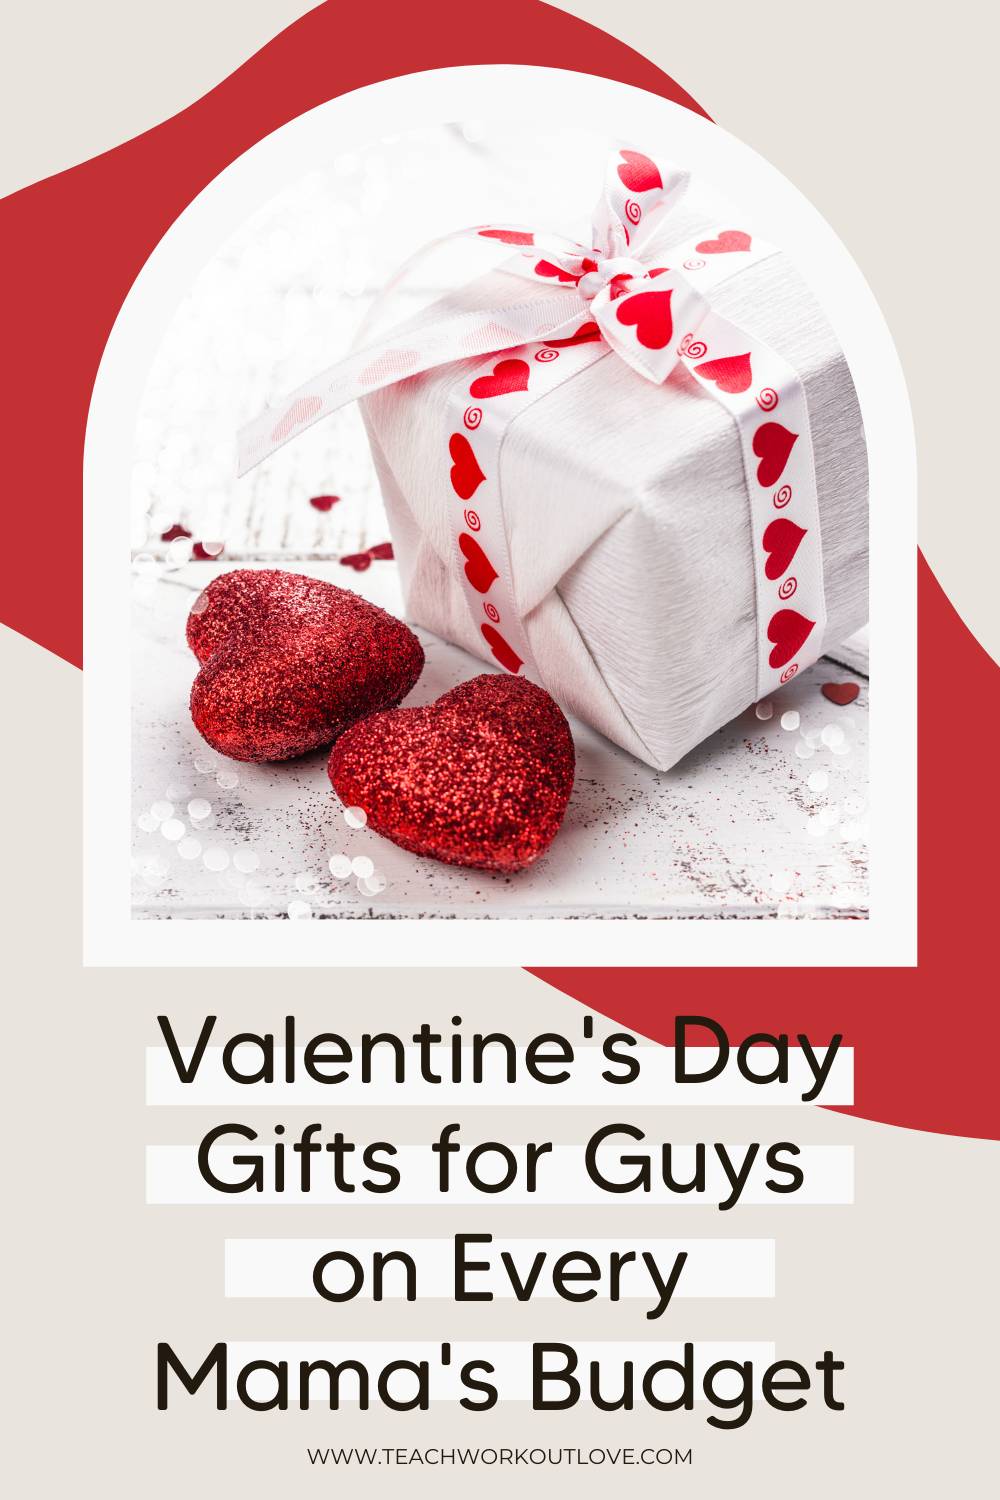 Valentine's Day is challenging to find the perfect gift for your partner. Here's a list of Valentine's Day Guy Gifts, expensive and affordable gifts.